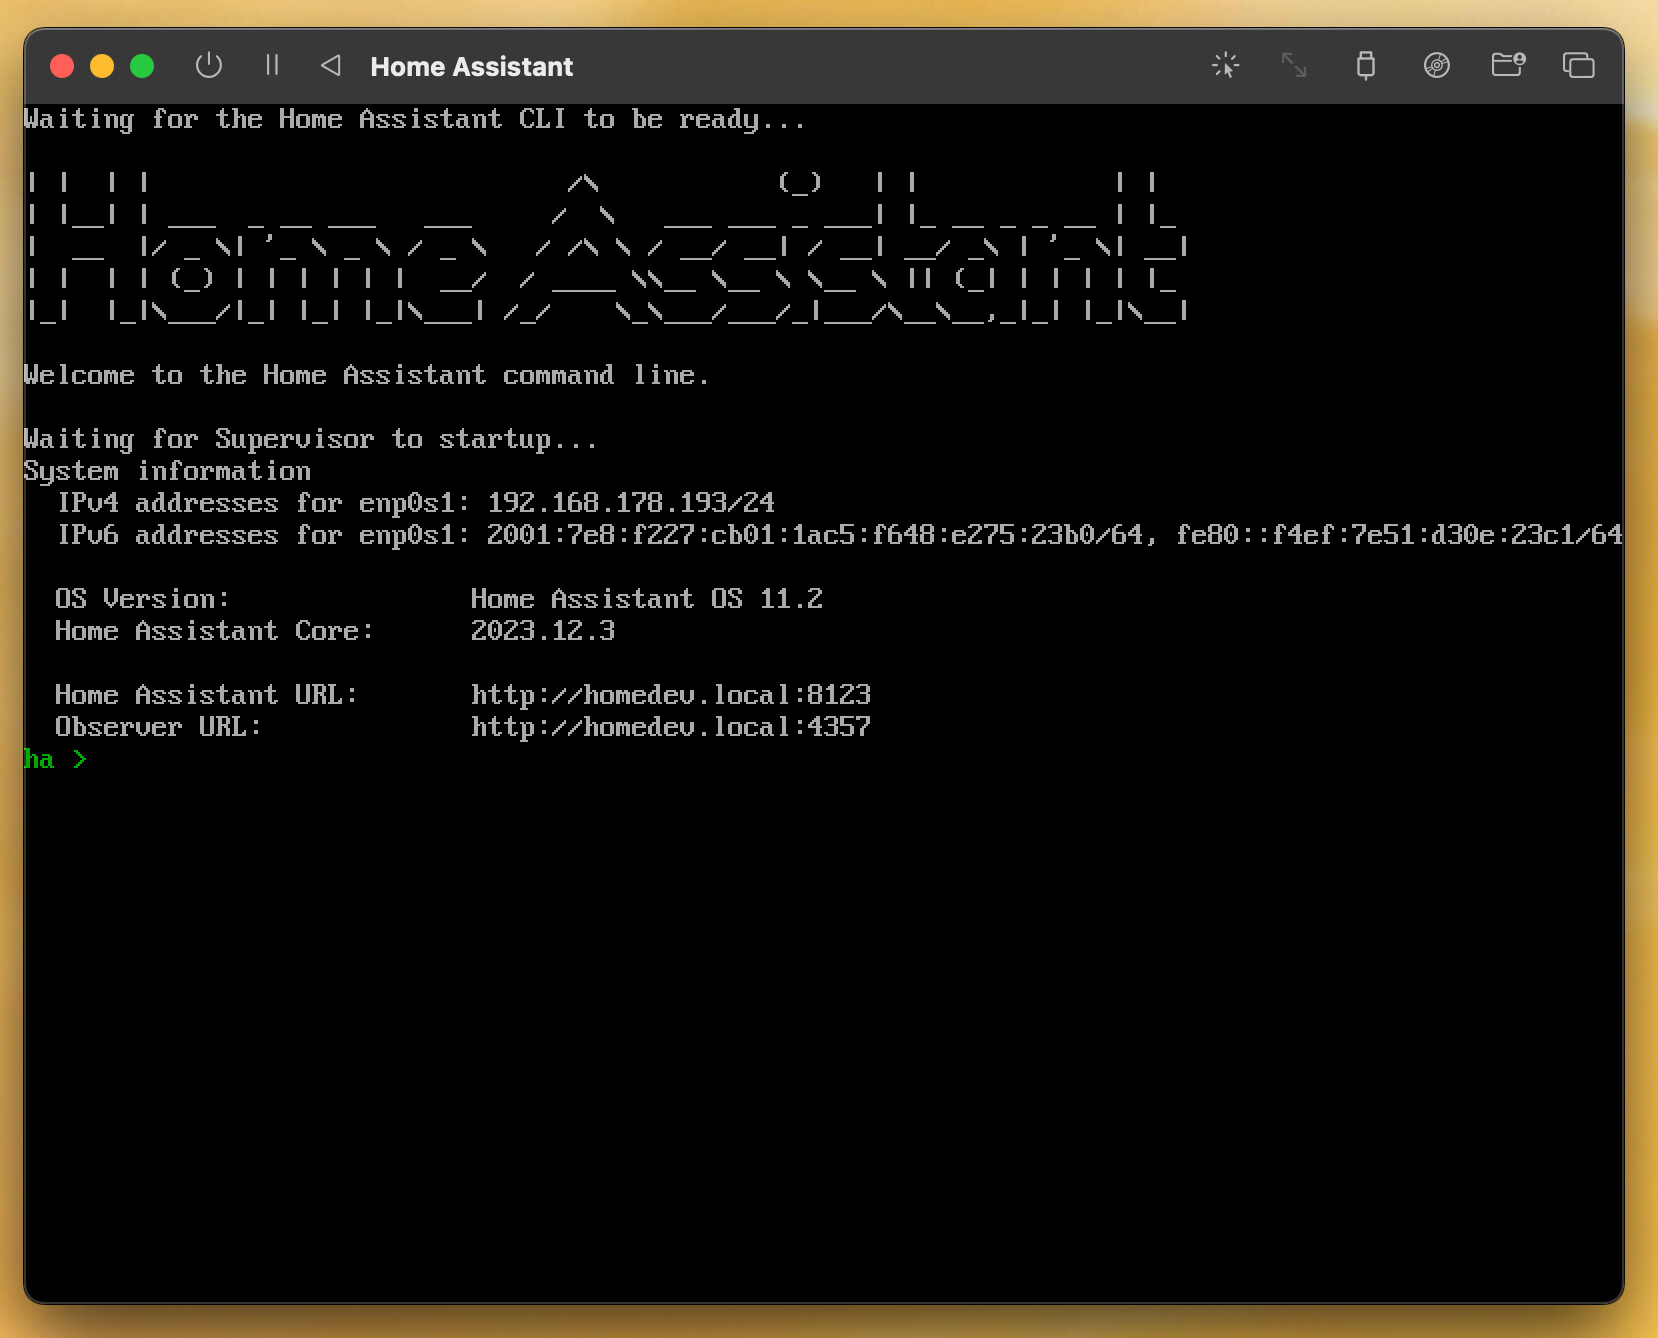 Home Assistant OS Release 6 - Home Assistant